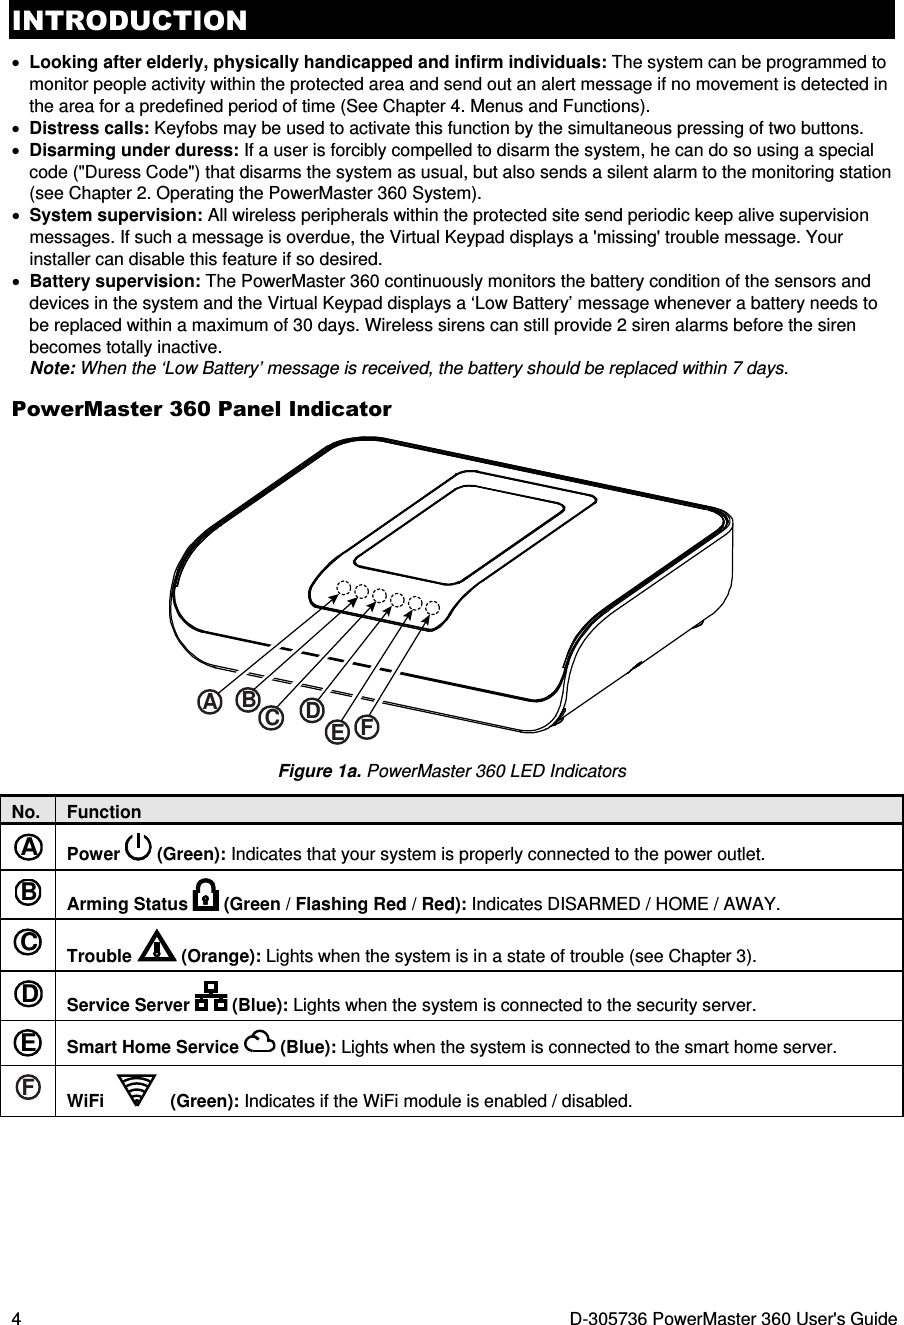 INTRODUCTION 4  D-305736 PowerMaster 360 User&apos;s Guide • Looking after elderly, physically handicapped and infirm individuals: The system can be programmed to monitor people activity within the protected area and send out an alert message if no movement is detected in the area for a predefined period of time (See Chapter 4. Menus and Functions).  • Distress calls: Keyfobs may be used to activate this function by the simultaneous pressing of two buttons. • Disarming under duress: If a user is forcibly compelled to disarm the system, he can do so using a special code (&quot;Duress Code&quot;) that disarms the system as usual, but also sends a silent alarm to the monitoring station (see Chapter 2. Operating the PowerMaster 360 System). • System supervision: All wireless peripherals within the protected site send periodic keep alive supervision messages. If such a message is overdue, the Virtual Keypad displays a &apos;missing&apos; trouble message. Your installer can disable this feature if so desired. • Battery supervision: The PowerMaster 360 continuously monitors the battery condition of the sensors and devices in the system and the Virtual Keypad displays a ‘Low Battery’ message whenever a battery needs to be replaced within a maximum of 30 days. Wireless sirens can still provide 2 siren alarms before the siren becomes totally inactive. Note: When the ‘Low Battery’ message is received, the battery should be replaced within 7 days. PowerMaster 360 Panel Indicator ABCDEF Figure 1a. PowerMaster 360 LED Indicators No.  Function A Power   (Green): Indicates that your system is properly connected to the power outlet. B Arming Status   (Green / Flashing Red / Red): Indicates DISARMED / HOME / AWAY. C Trouble   (Orange): Lights when the system is in a state of trouble (see Chapter 3). D Service Server   (Blue): Lights when the system is connected to the security server. E Smart Home Service   (Blue): Lights when the system is connected to the smart home server. F WiFi   (Green): Indicates if the WiFi module is enabled / disabled. 